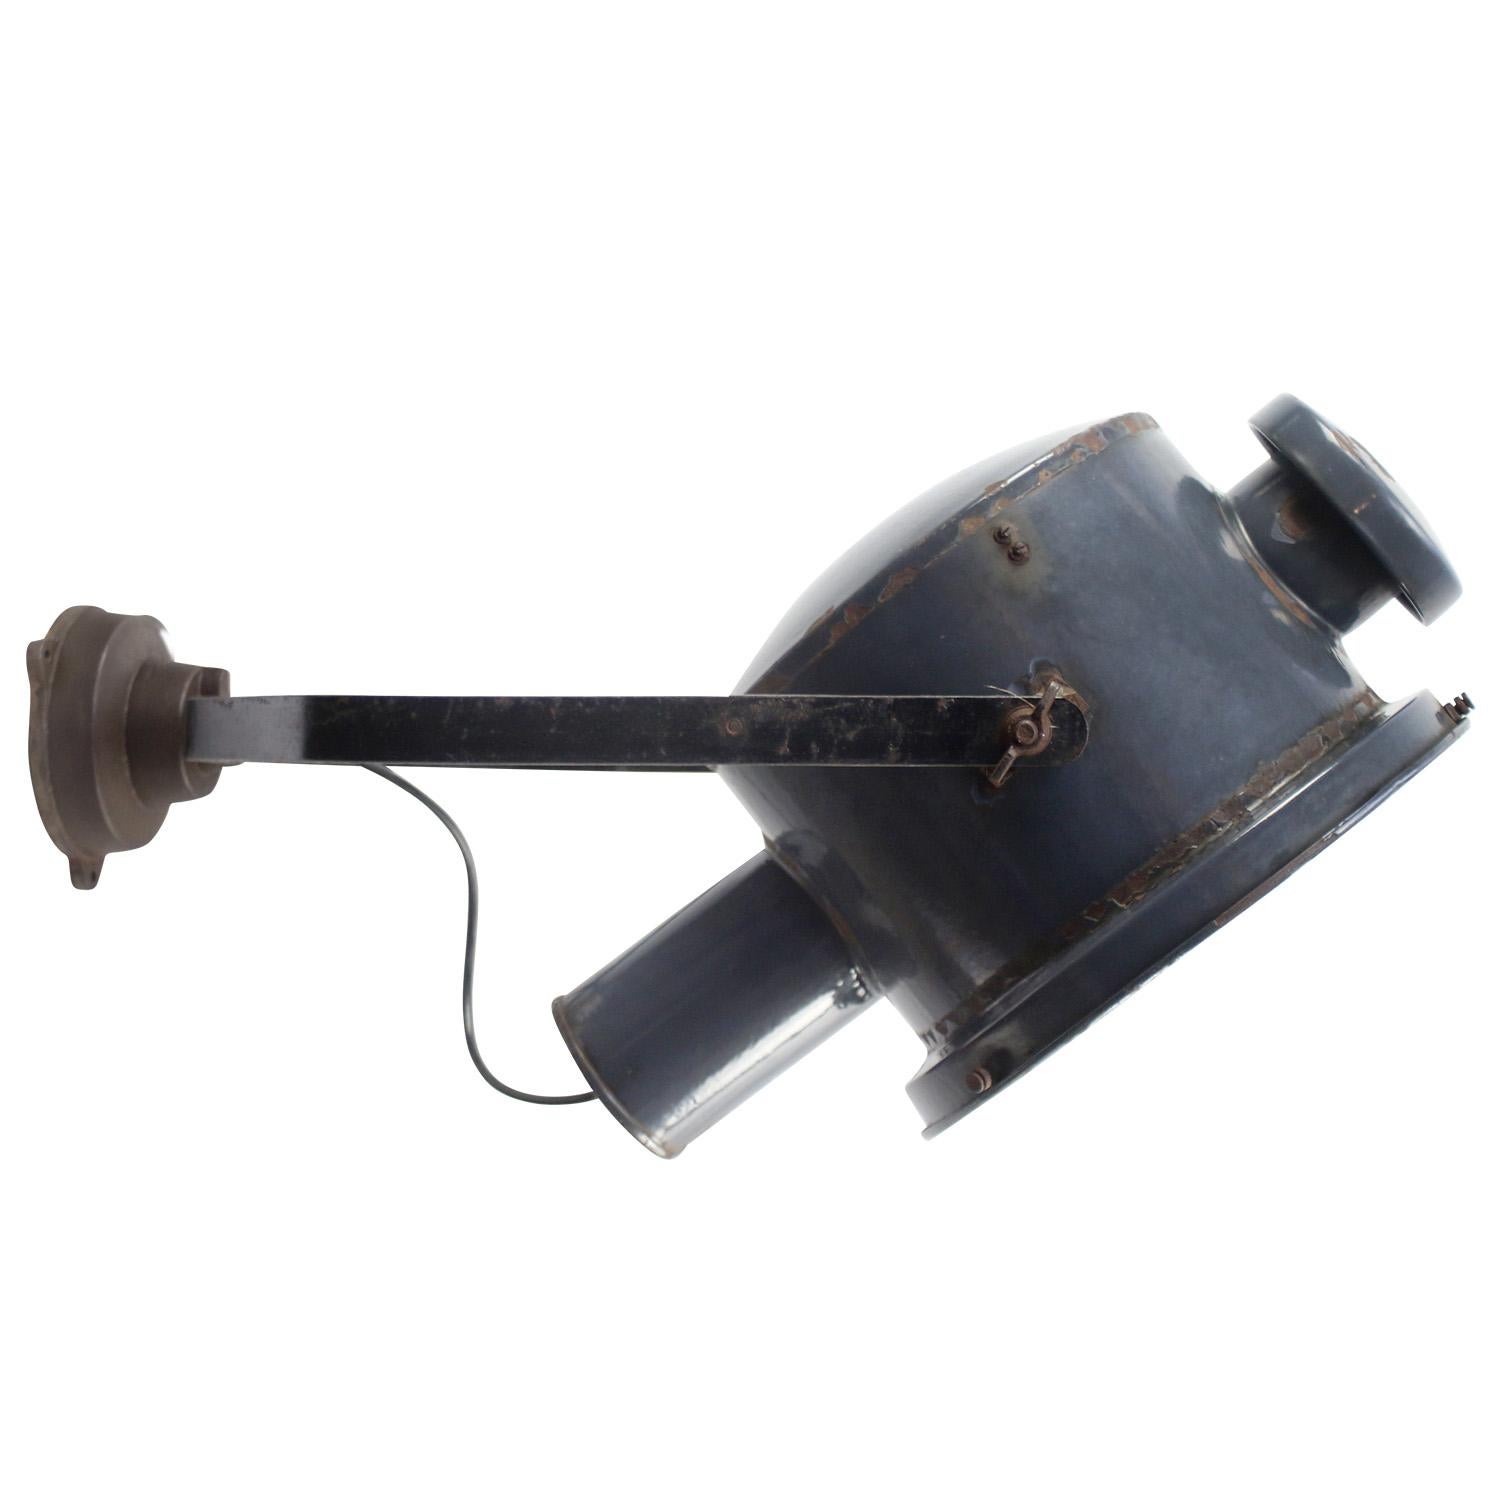 Blue enamel, cast iron parts and wall piece
Adjustable industrial wall light

Diameter wall mount 12 cm

Weight: 6.20 kg / 13.7 lb

Priced per individual item. All lamps have been made suitable by international standards for incandescent light